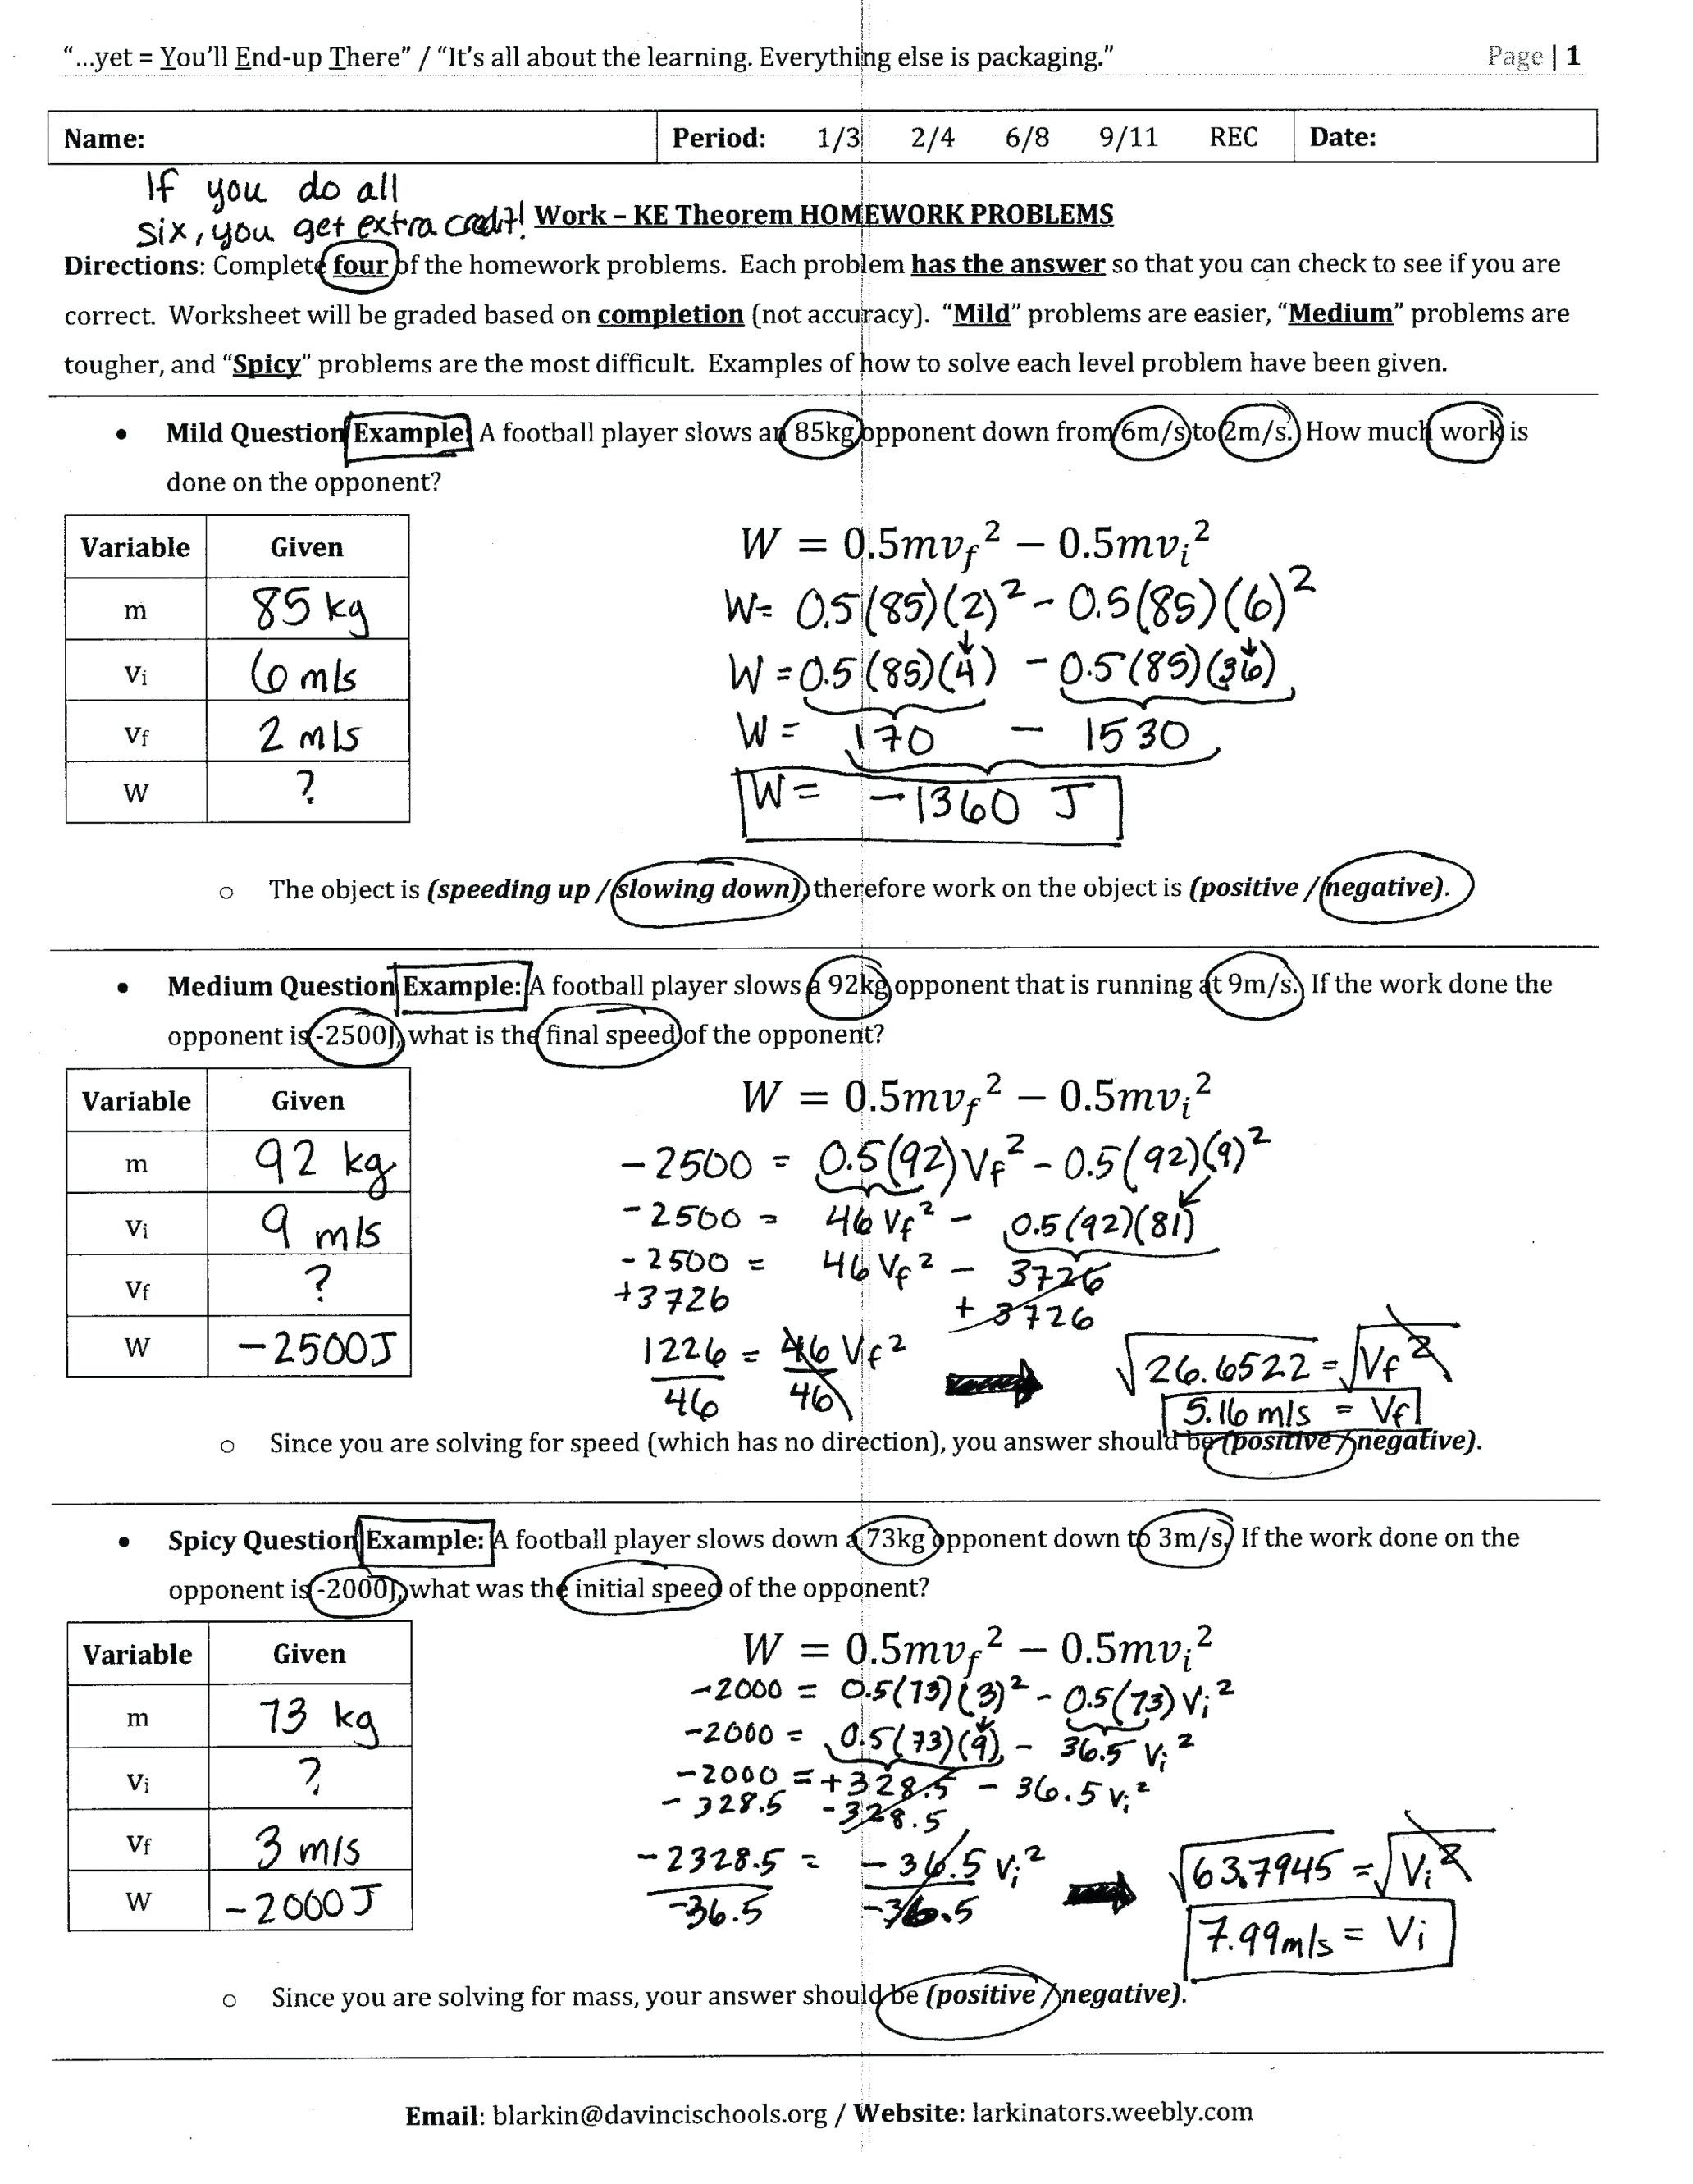 Physical Science Worksheets High School – Sunraysheetco — db-excel.com